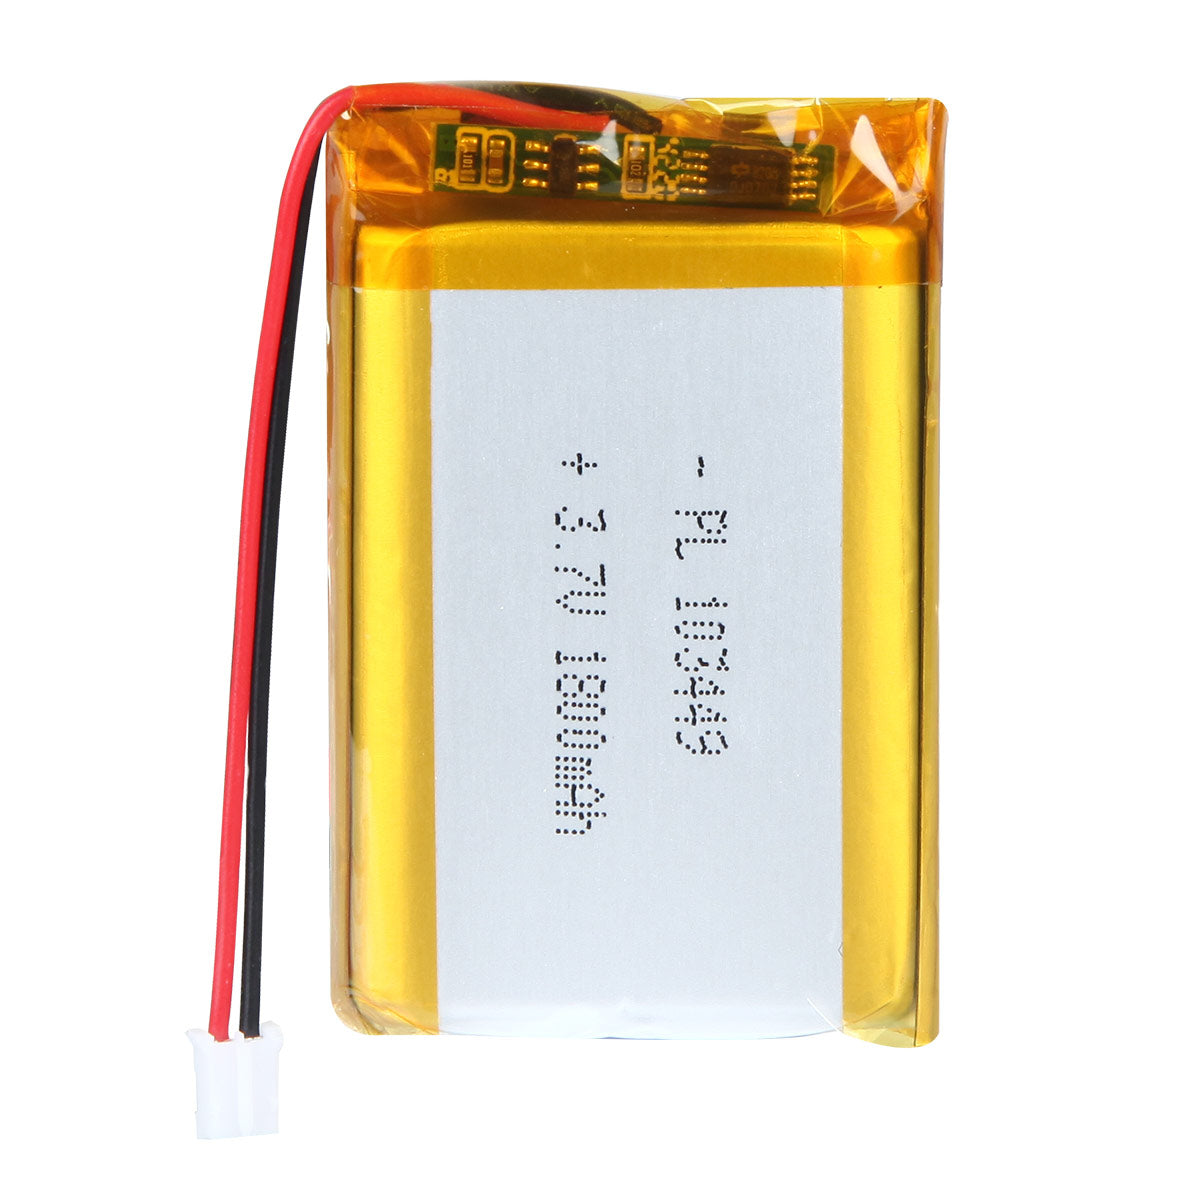 3.7V 1800mAh 103449 Rechargeable Lithium Polymer Battery